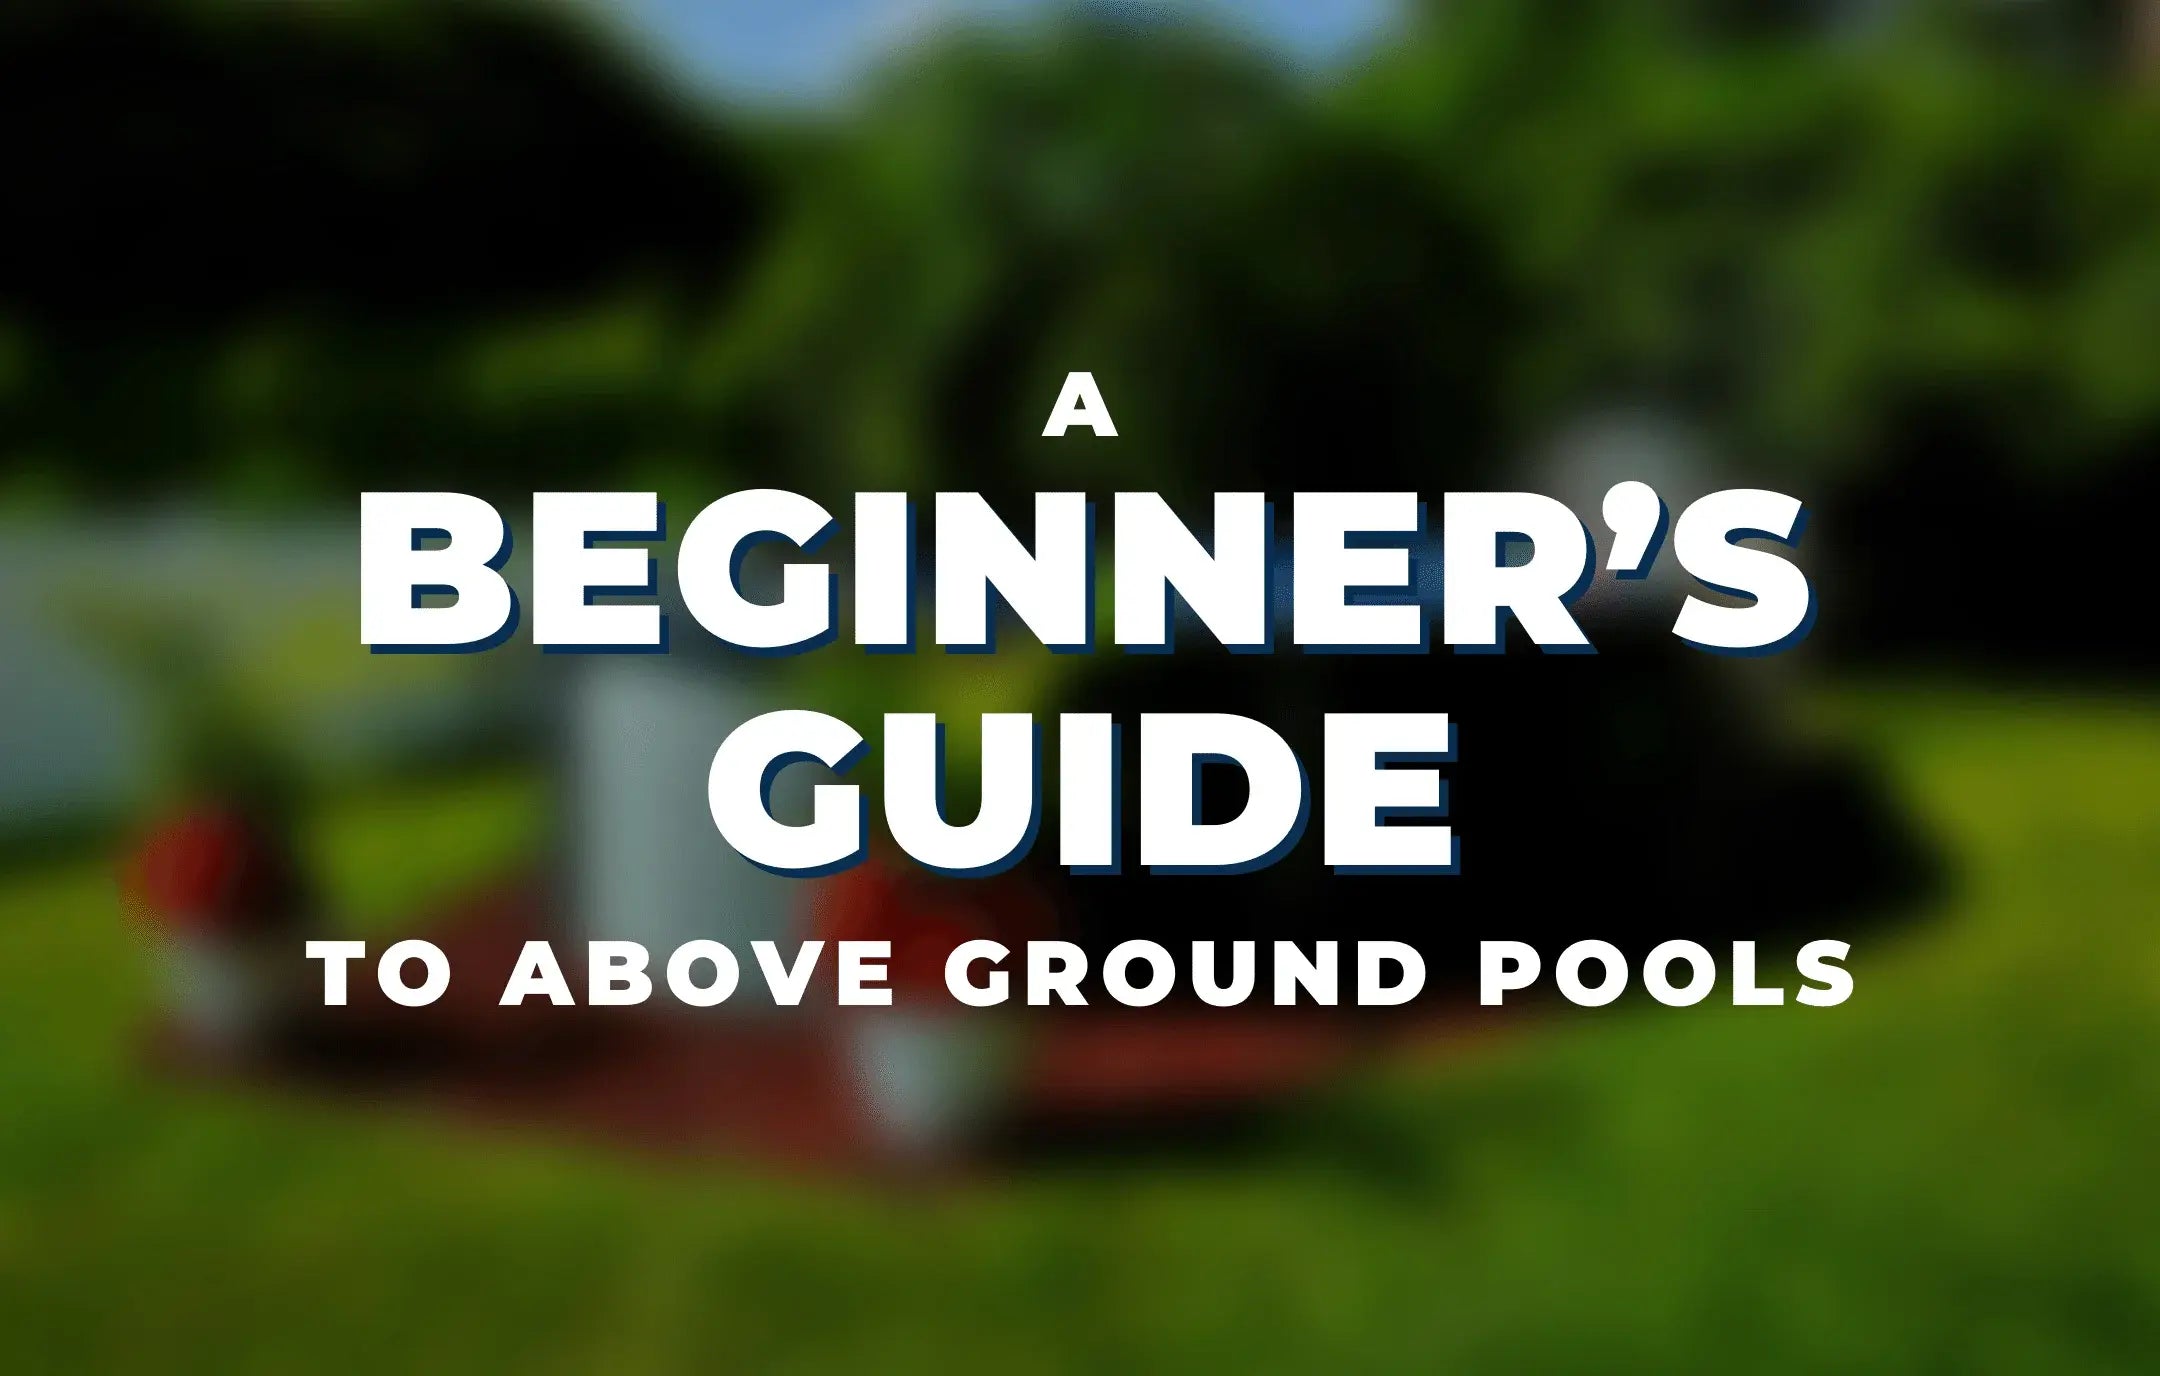 A Beginner's Guide to Above Ground Pools